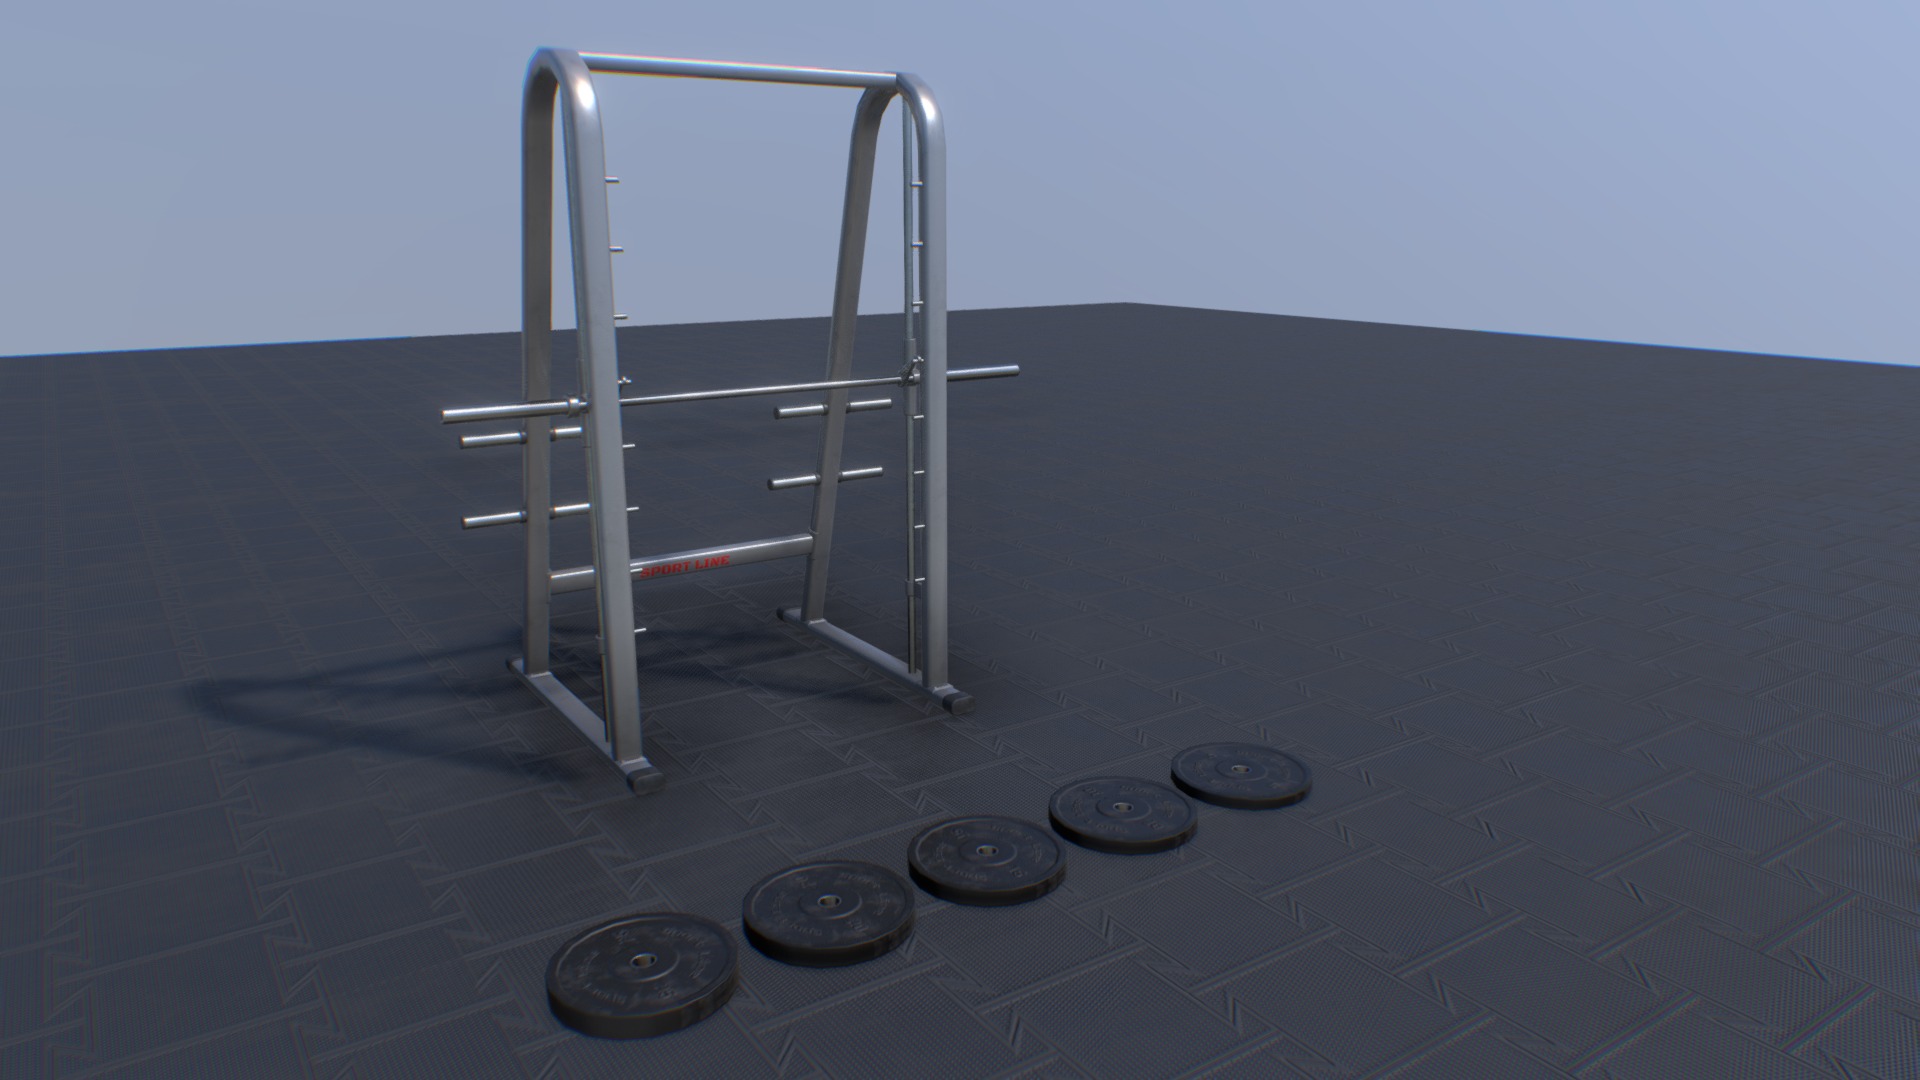 3D model Smith Machine - This is a 3D model of the Smith Machine. The 3D model is about a chair and a coin on a table.